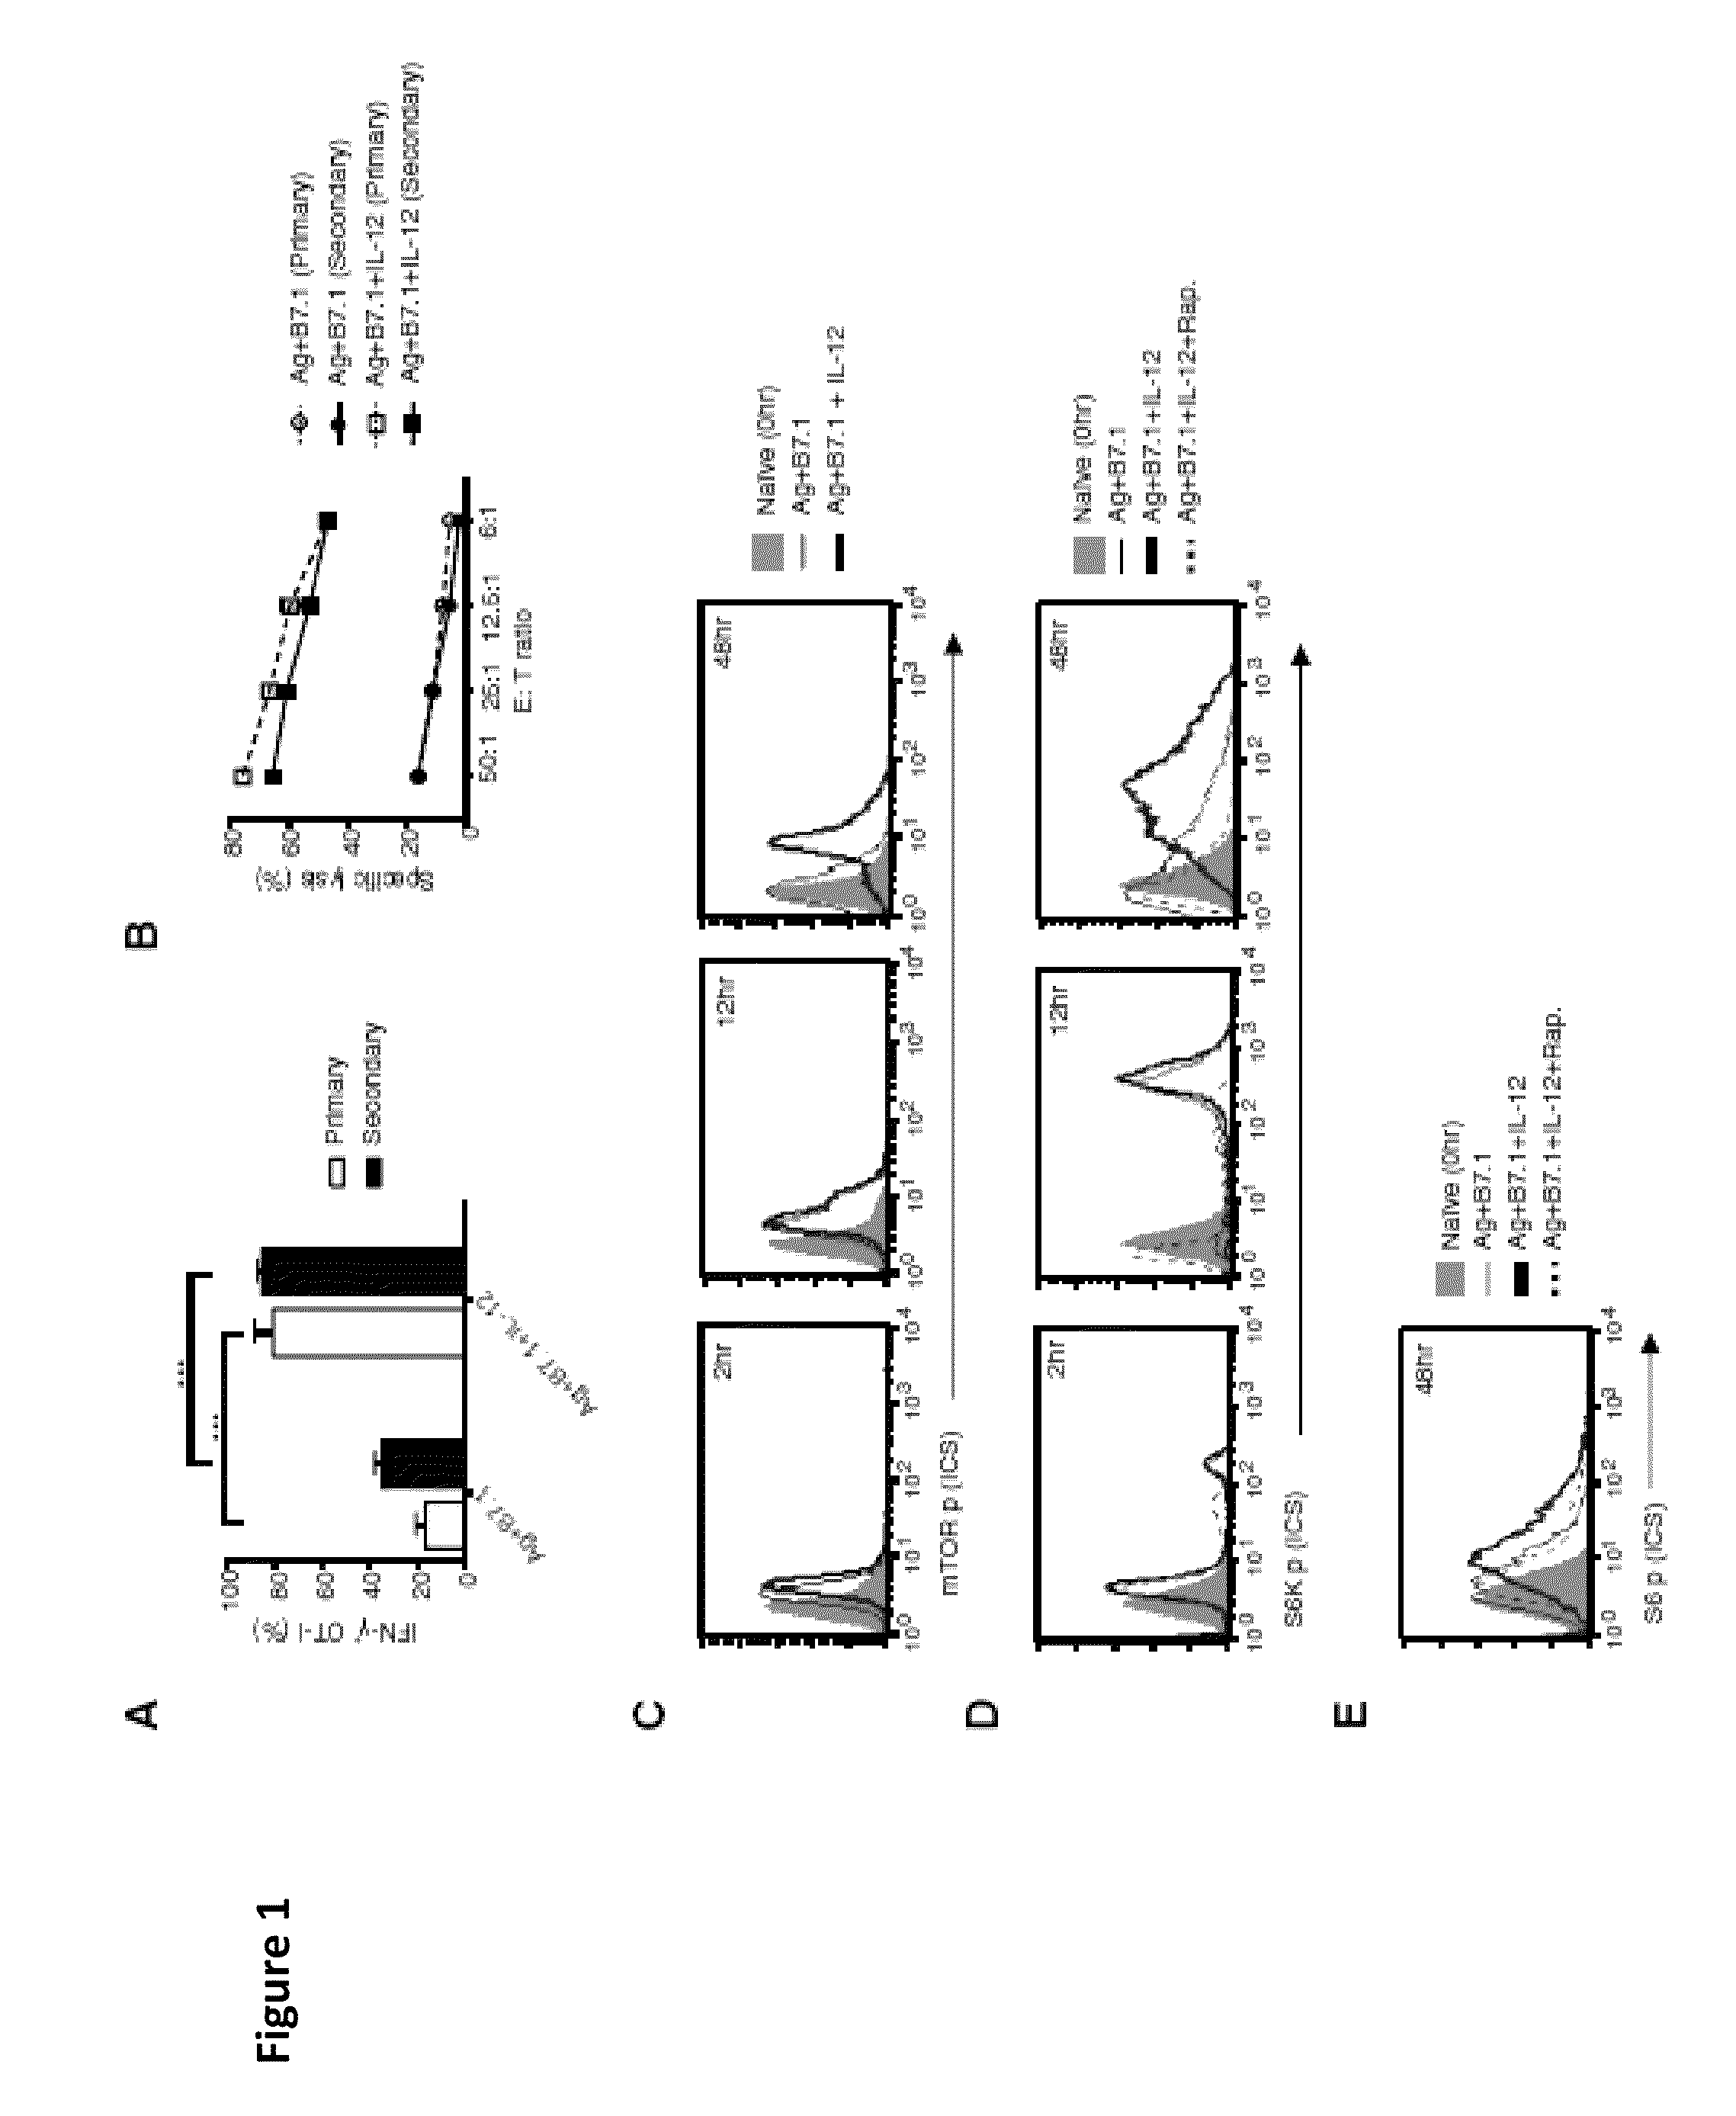 METHODS AND COMPOSITIONS CONTAINING mTOR INHIBITORS FOR ENHANCING IMMUNE RESPONSES